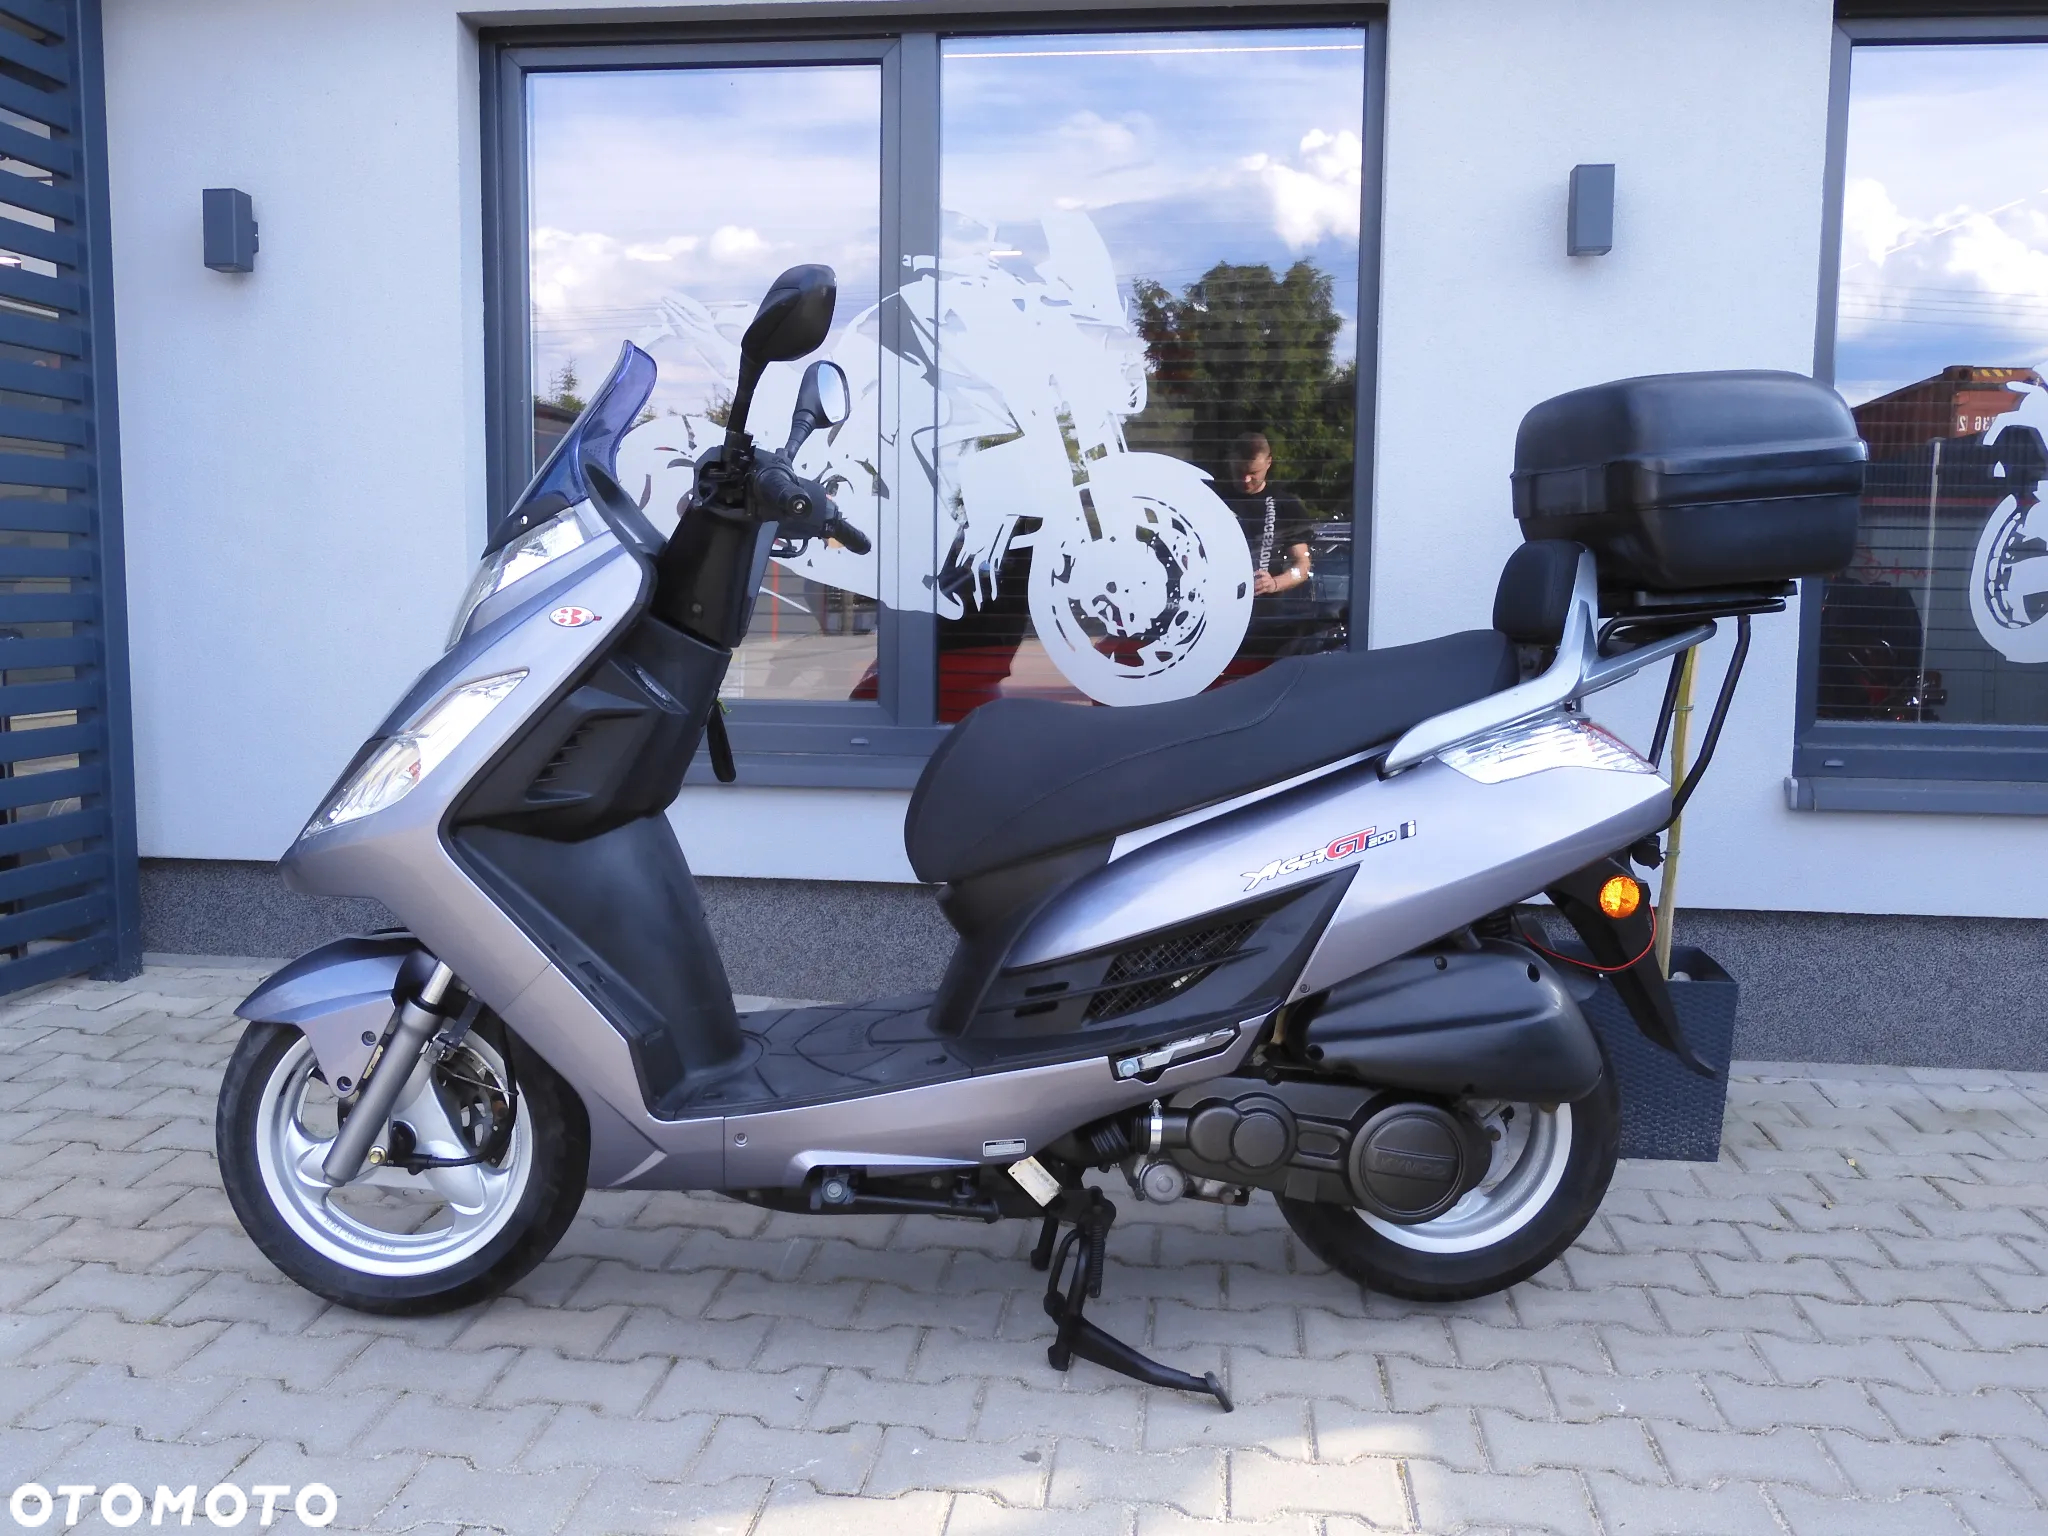 Kymco Yager GT - 19